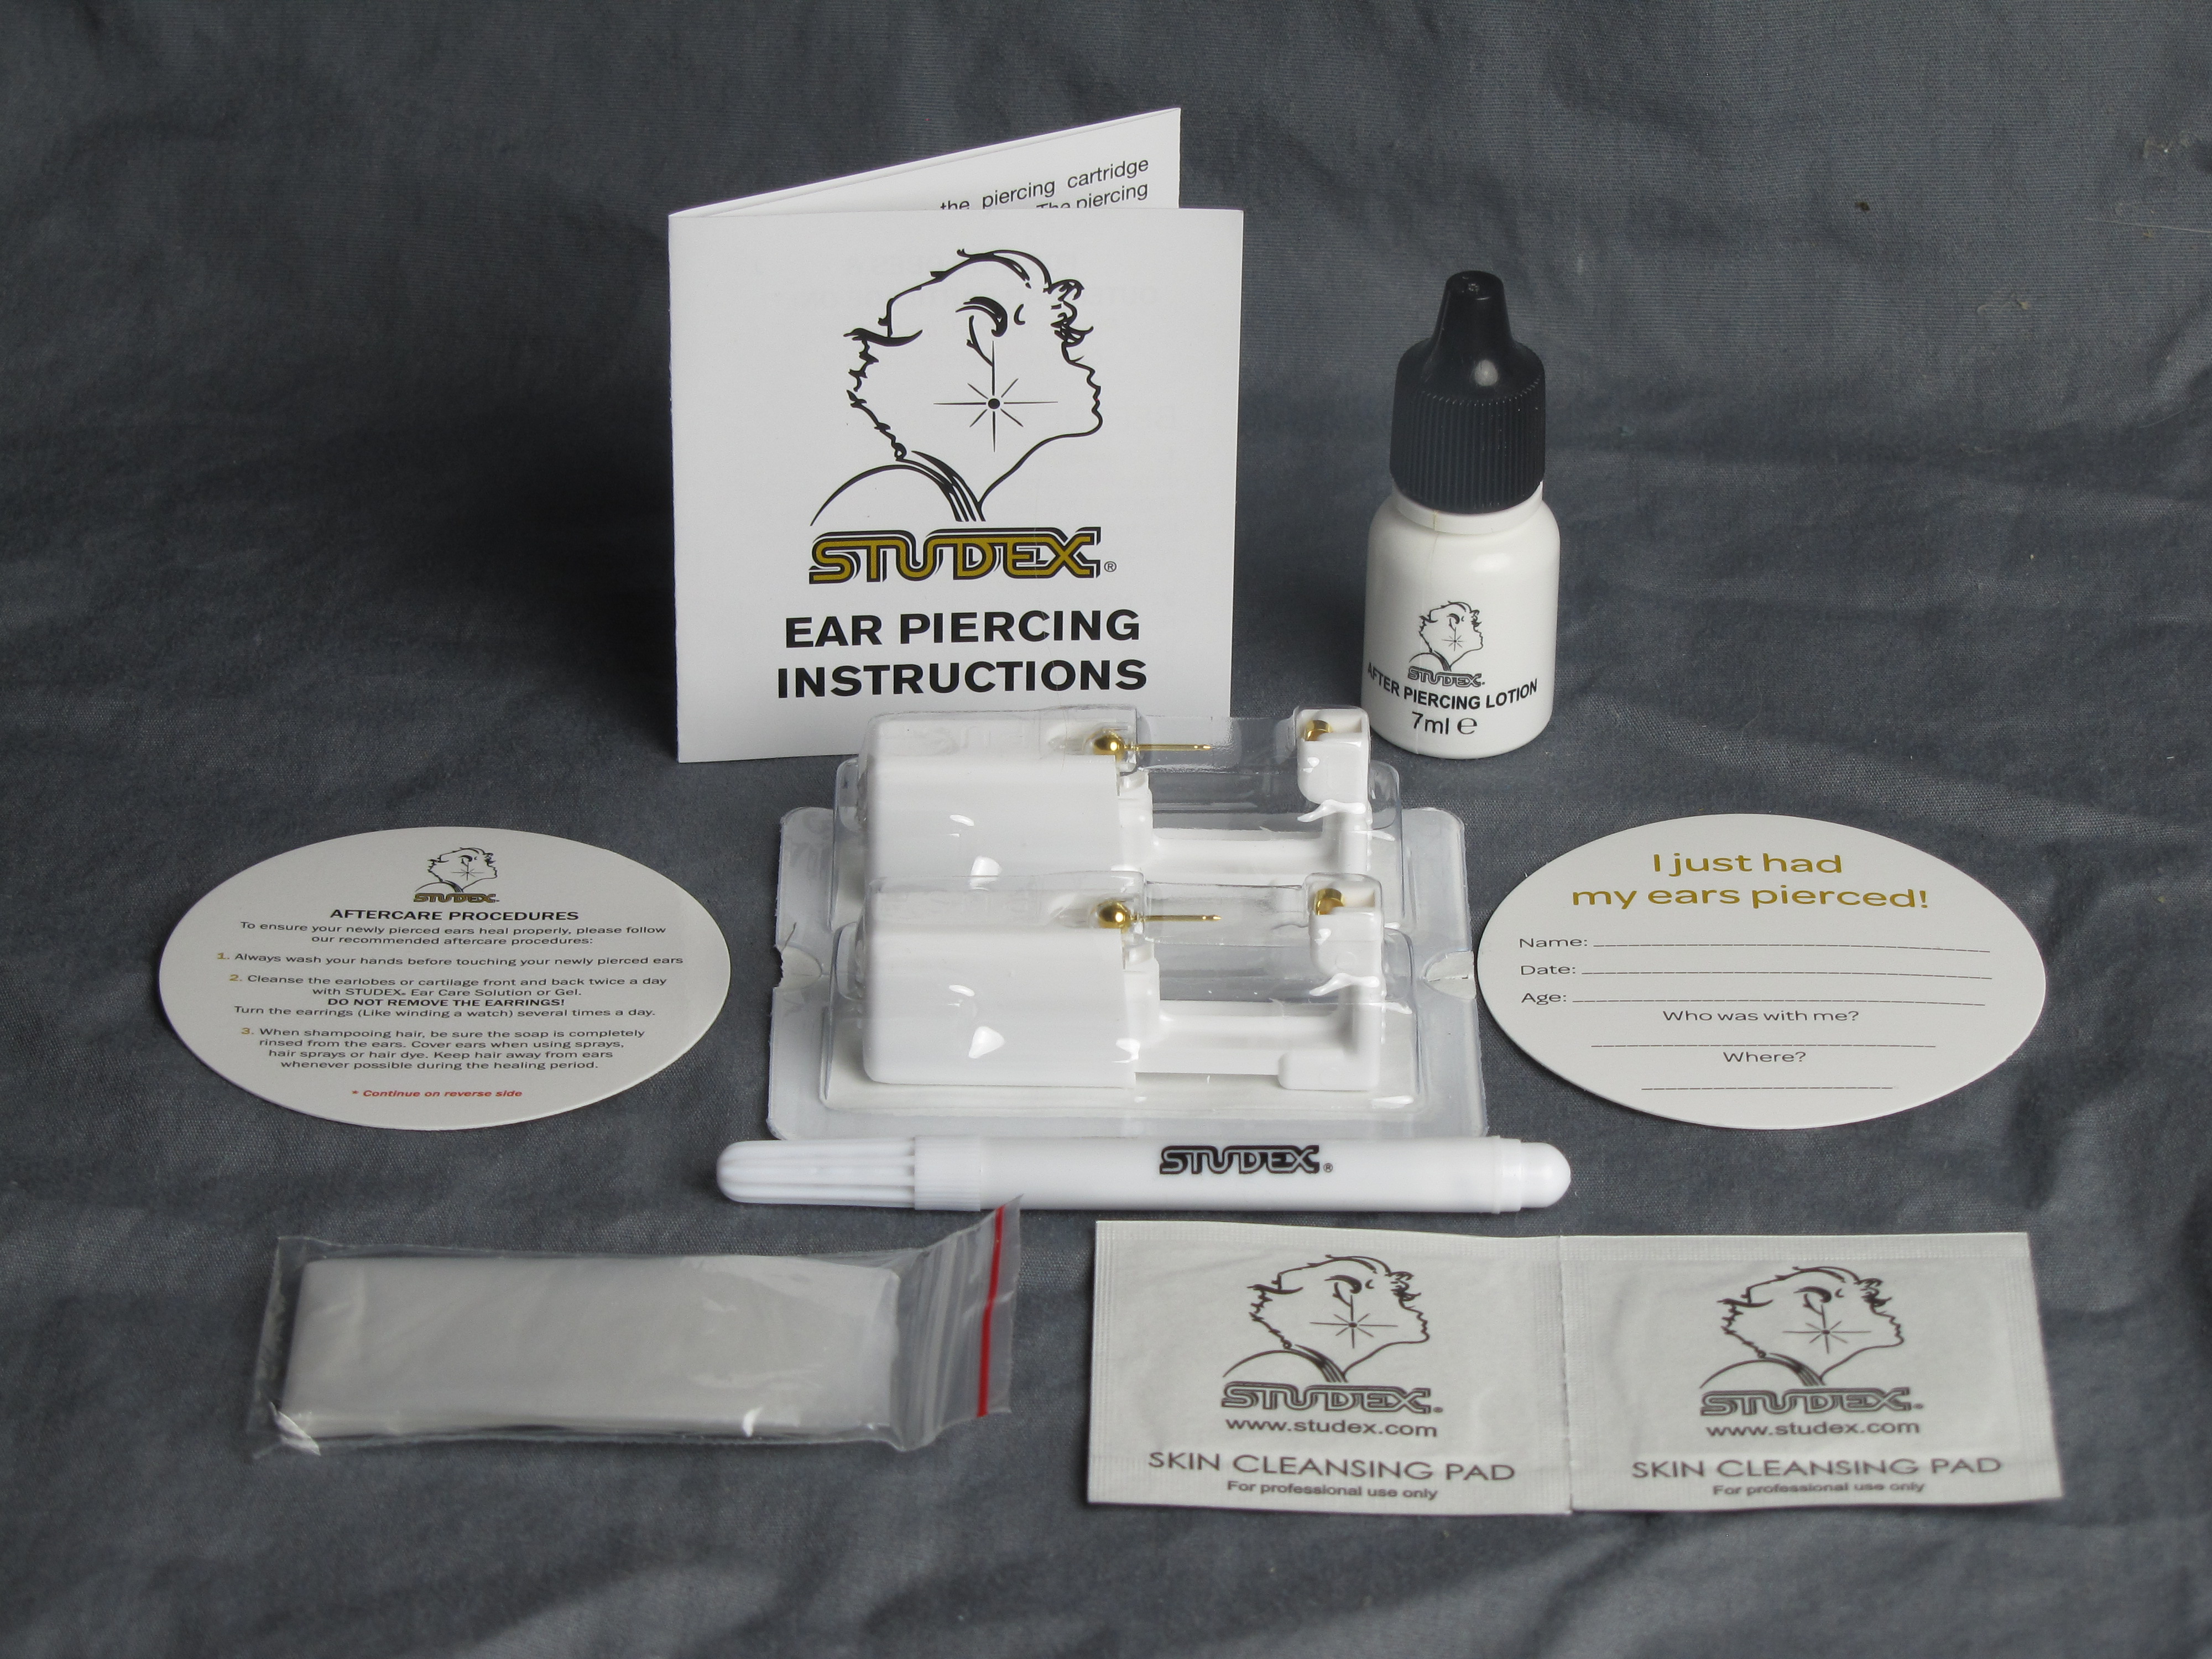 Studex Personal Ear Piercing Kit Contents